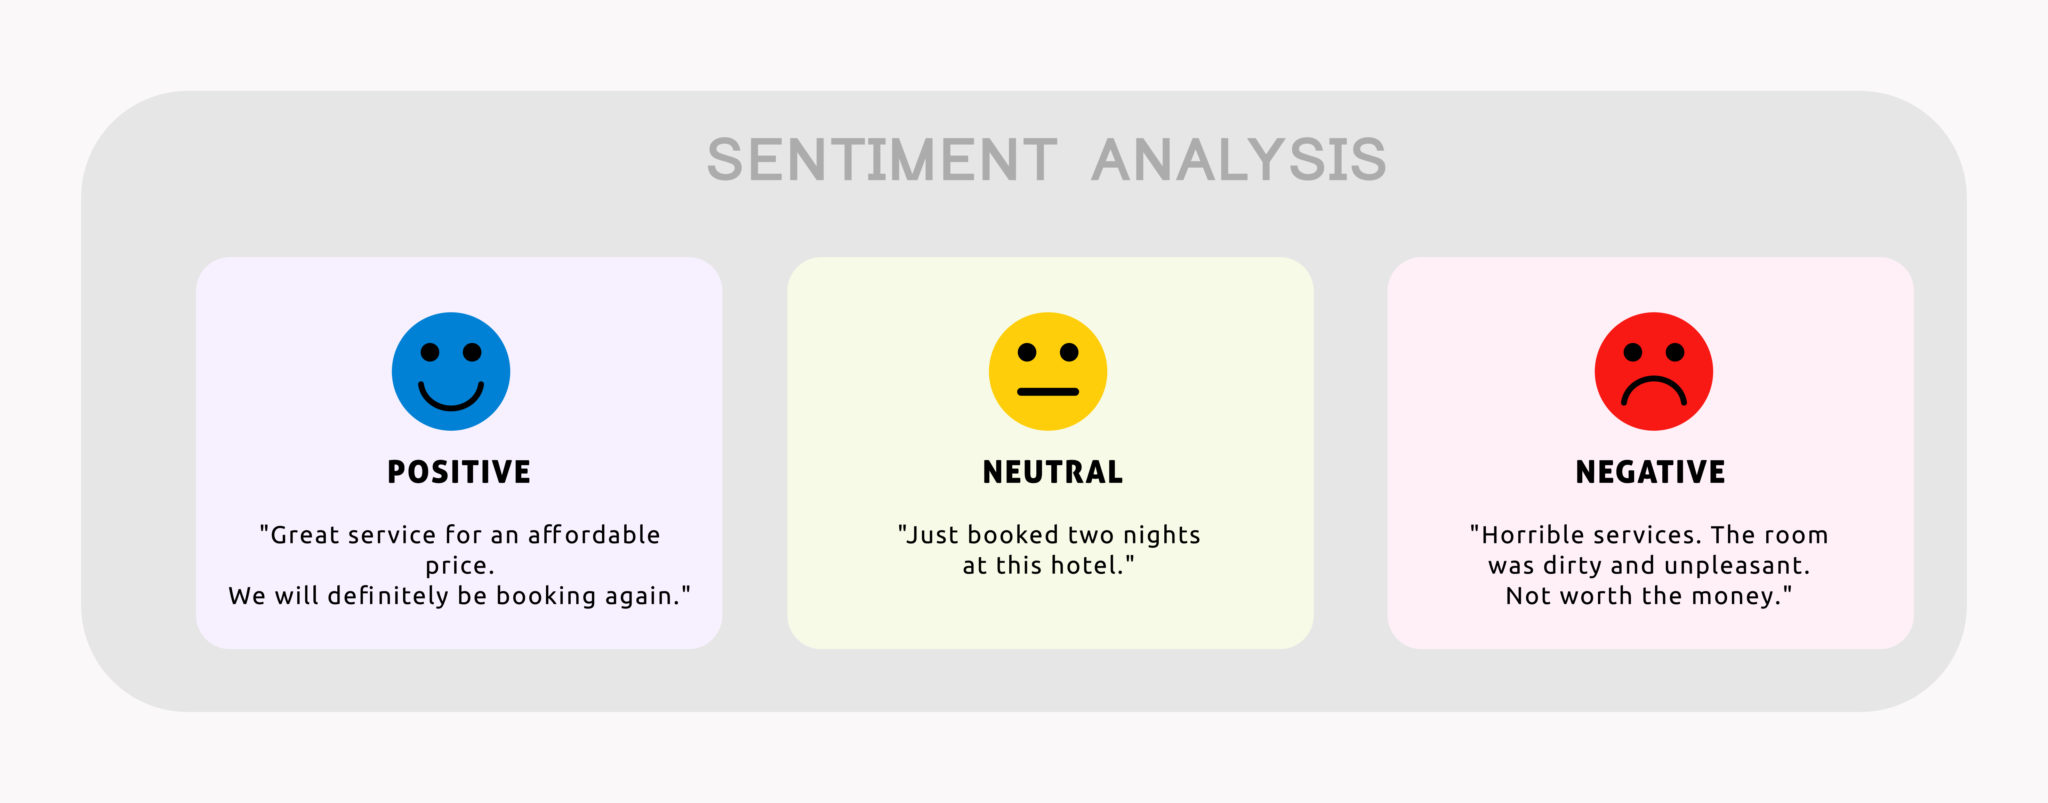 Uncover Emotions: Social Media Sentiment Analysis